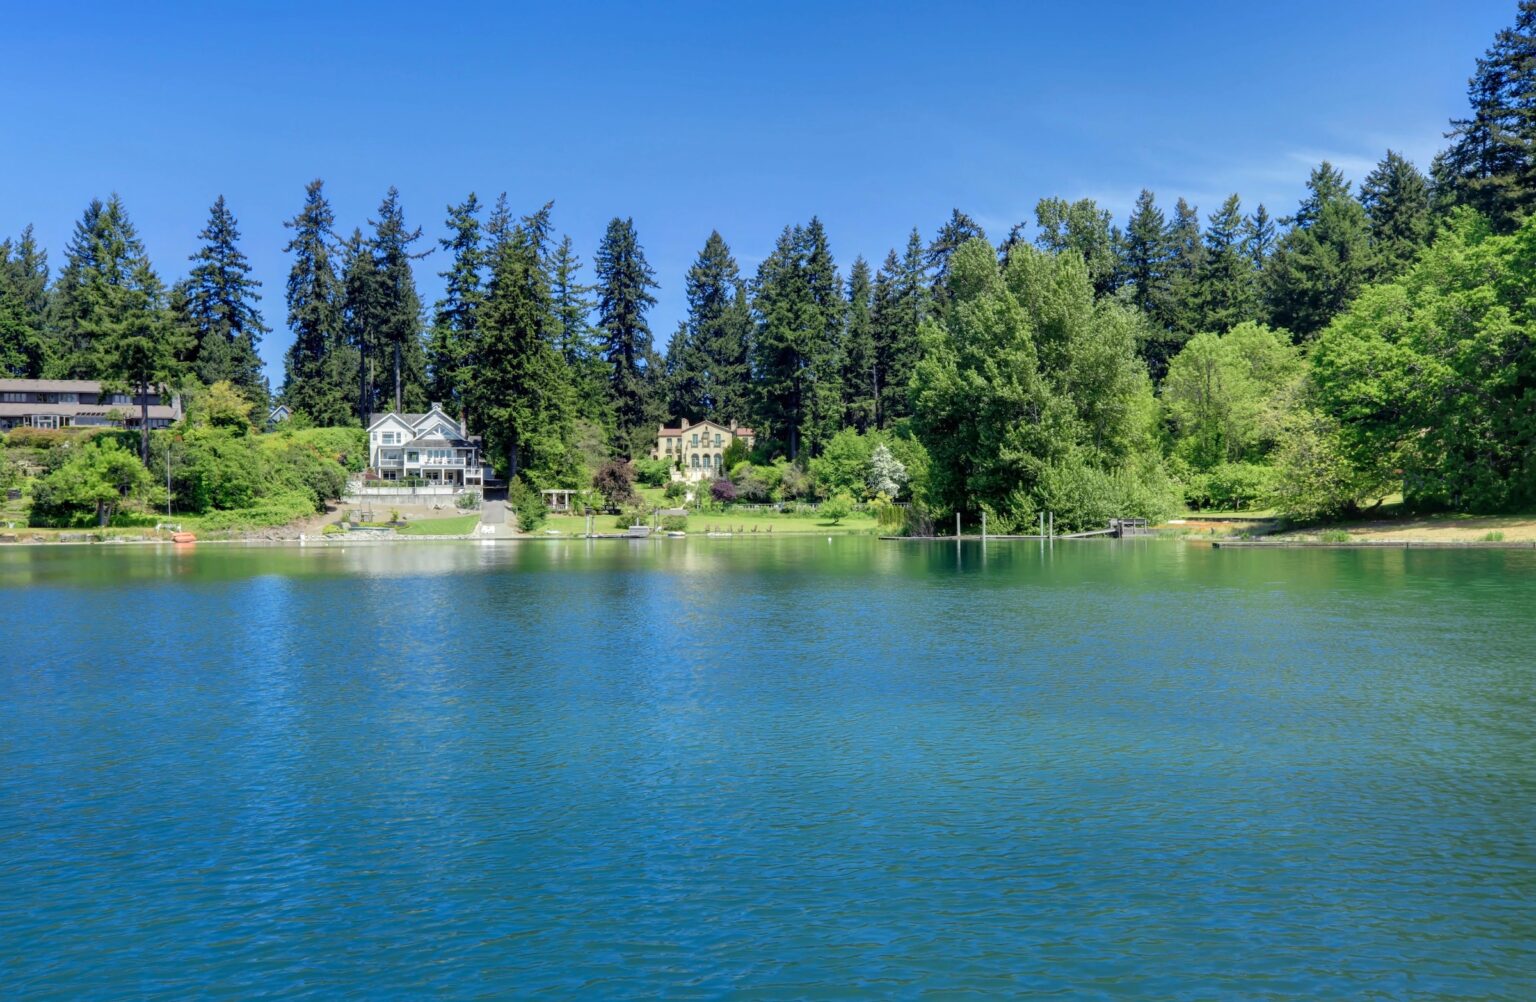 Lakewood, Washington, nestled in picturesque Pierce County, offers a desirable lifestyle with its natural beauty. Is it a pricey area?